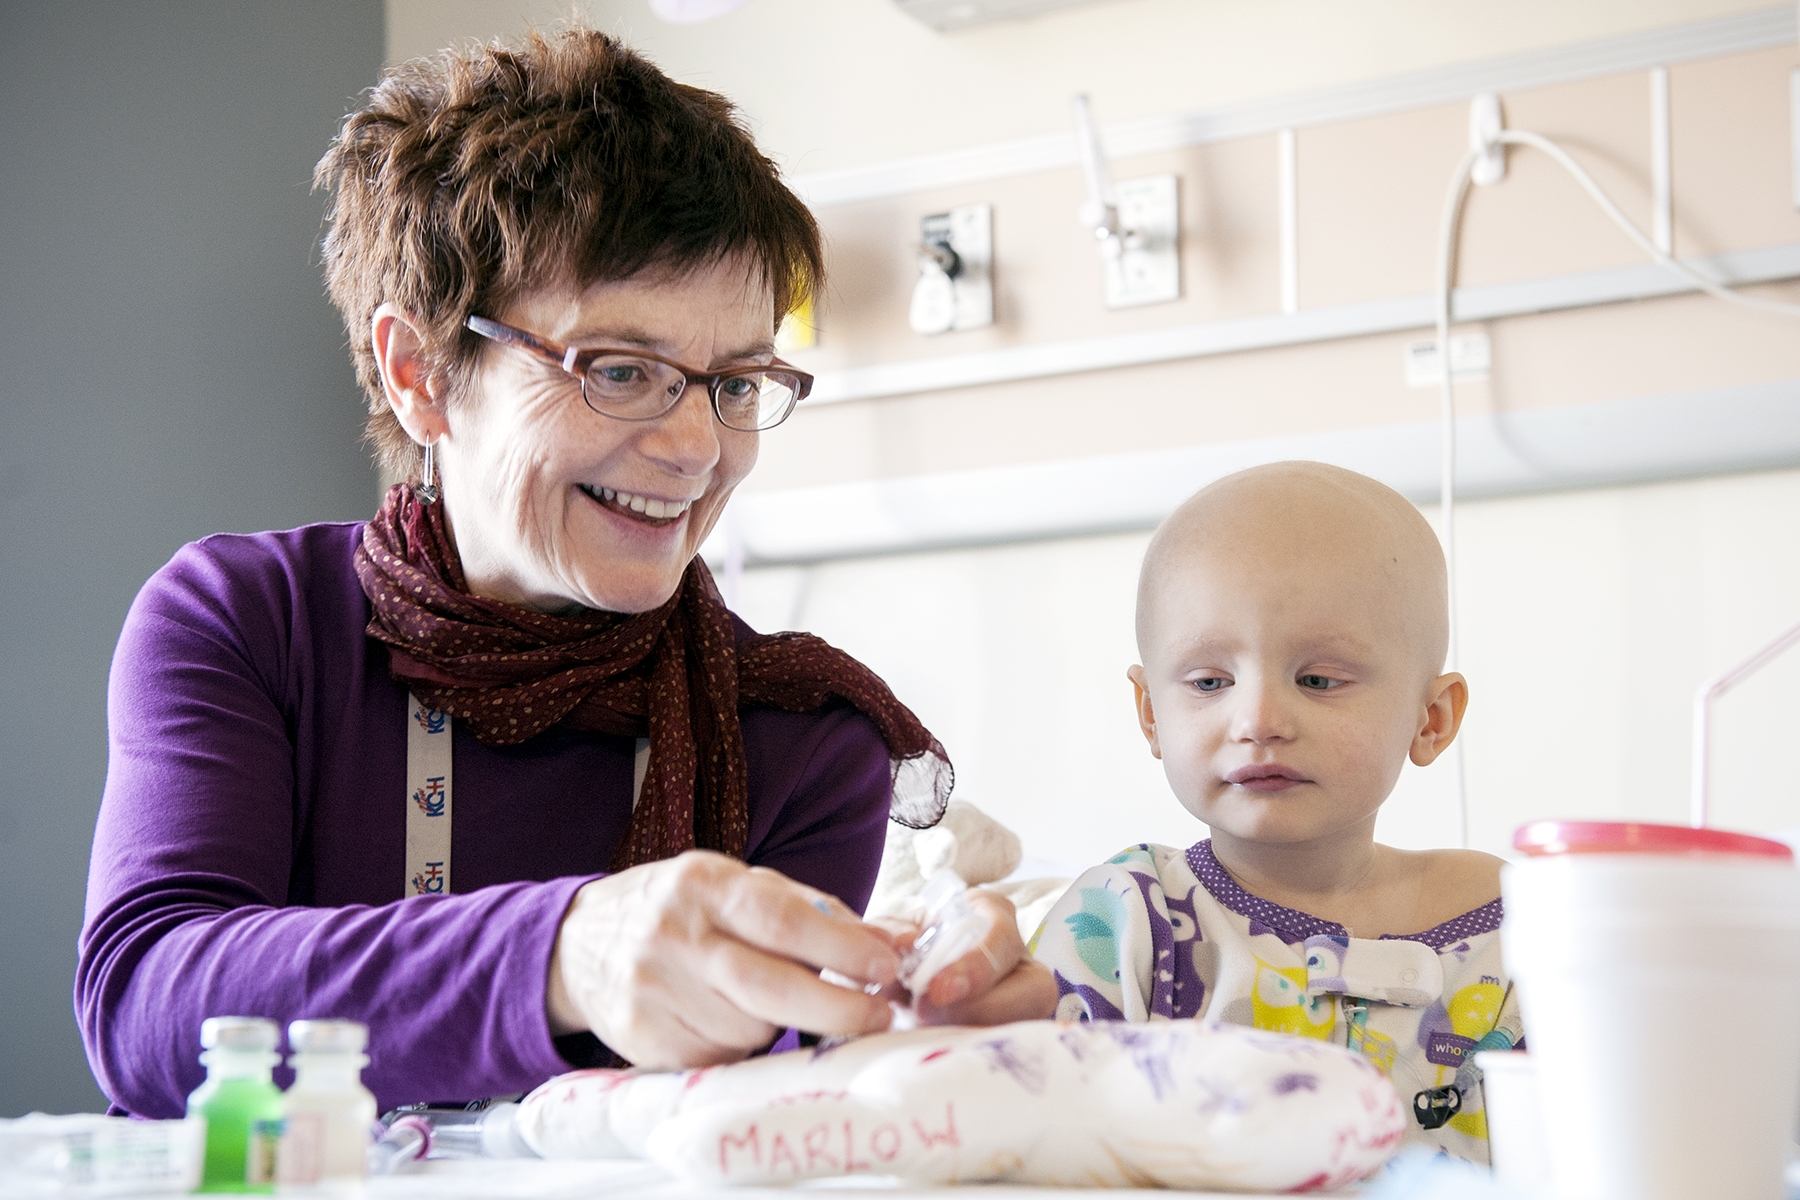 Child Life Specialists help young patients understand their care plan